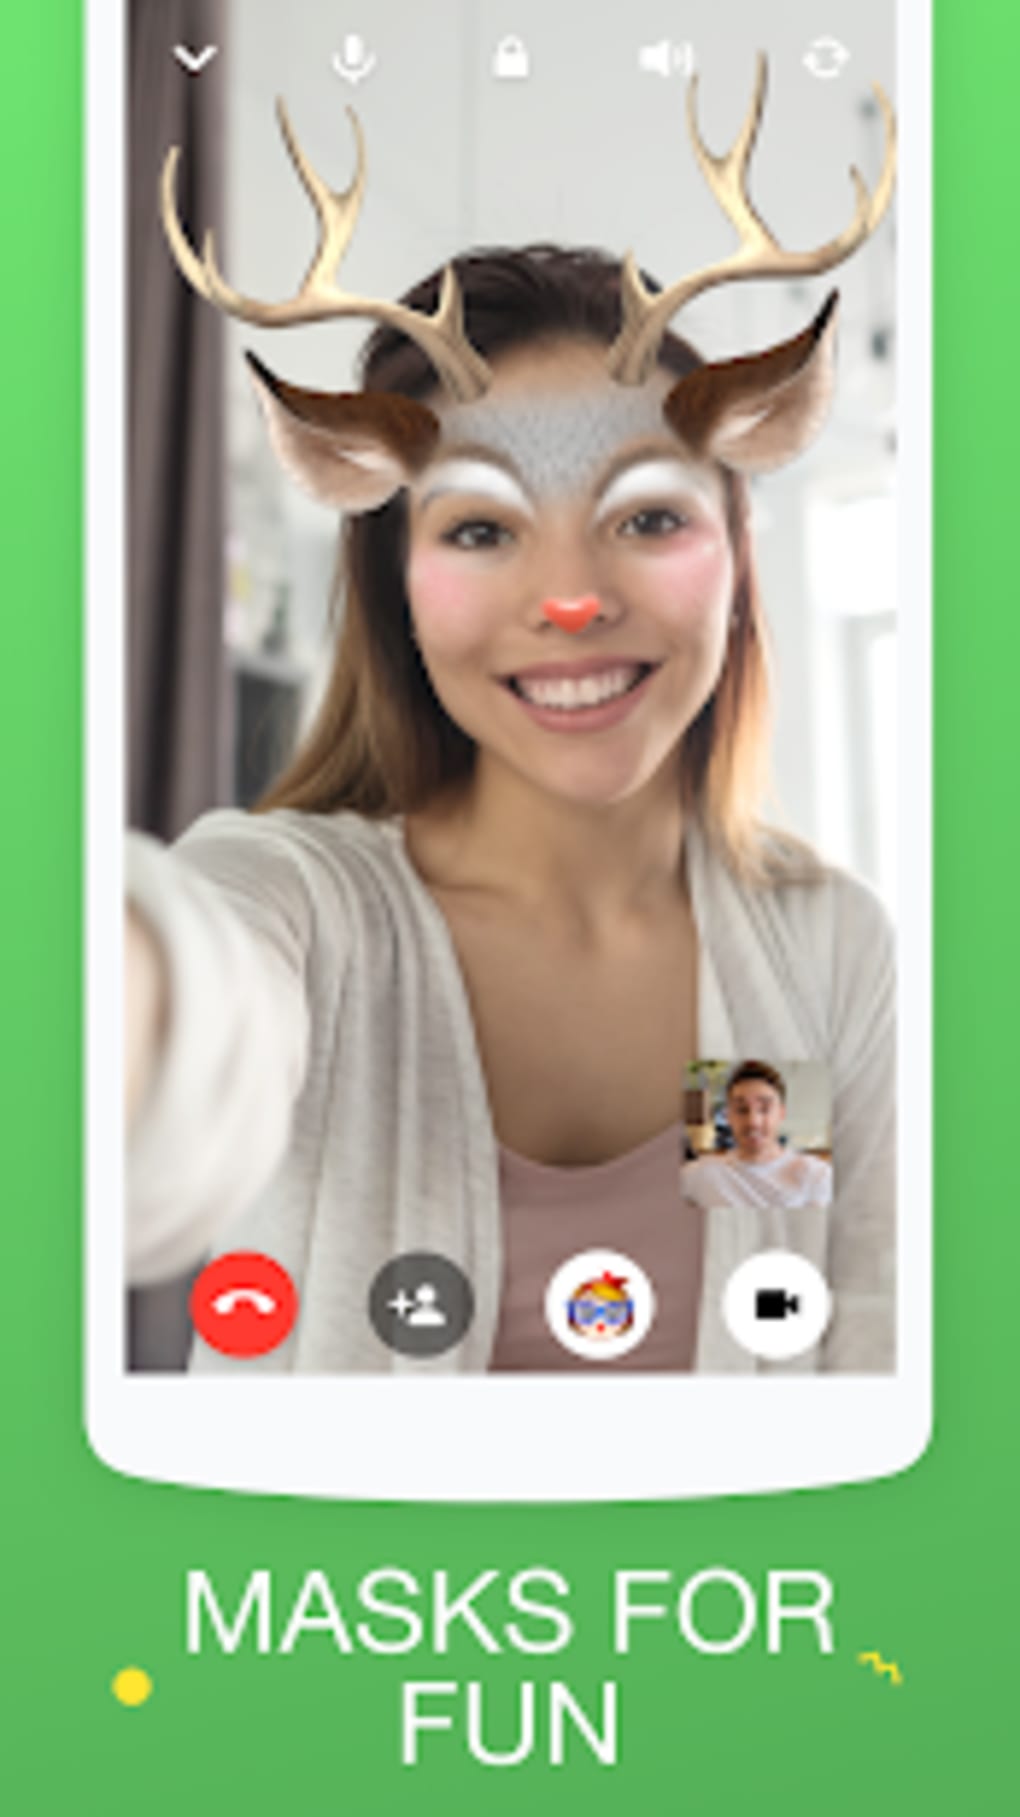 Download Icq Messenger For Android